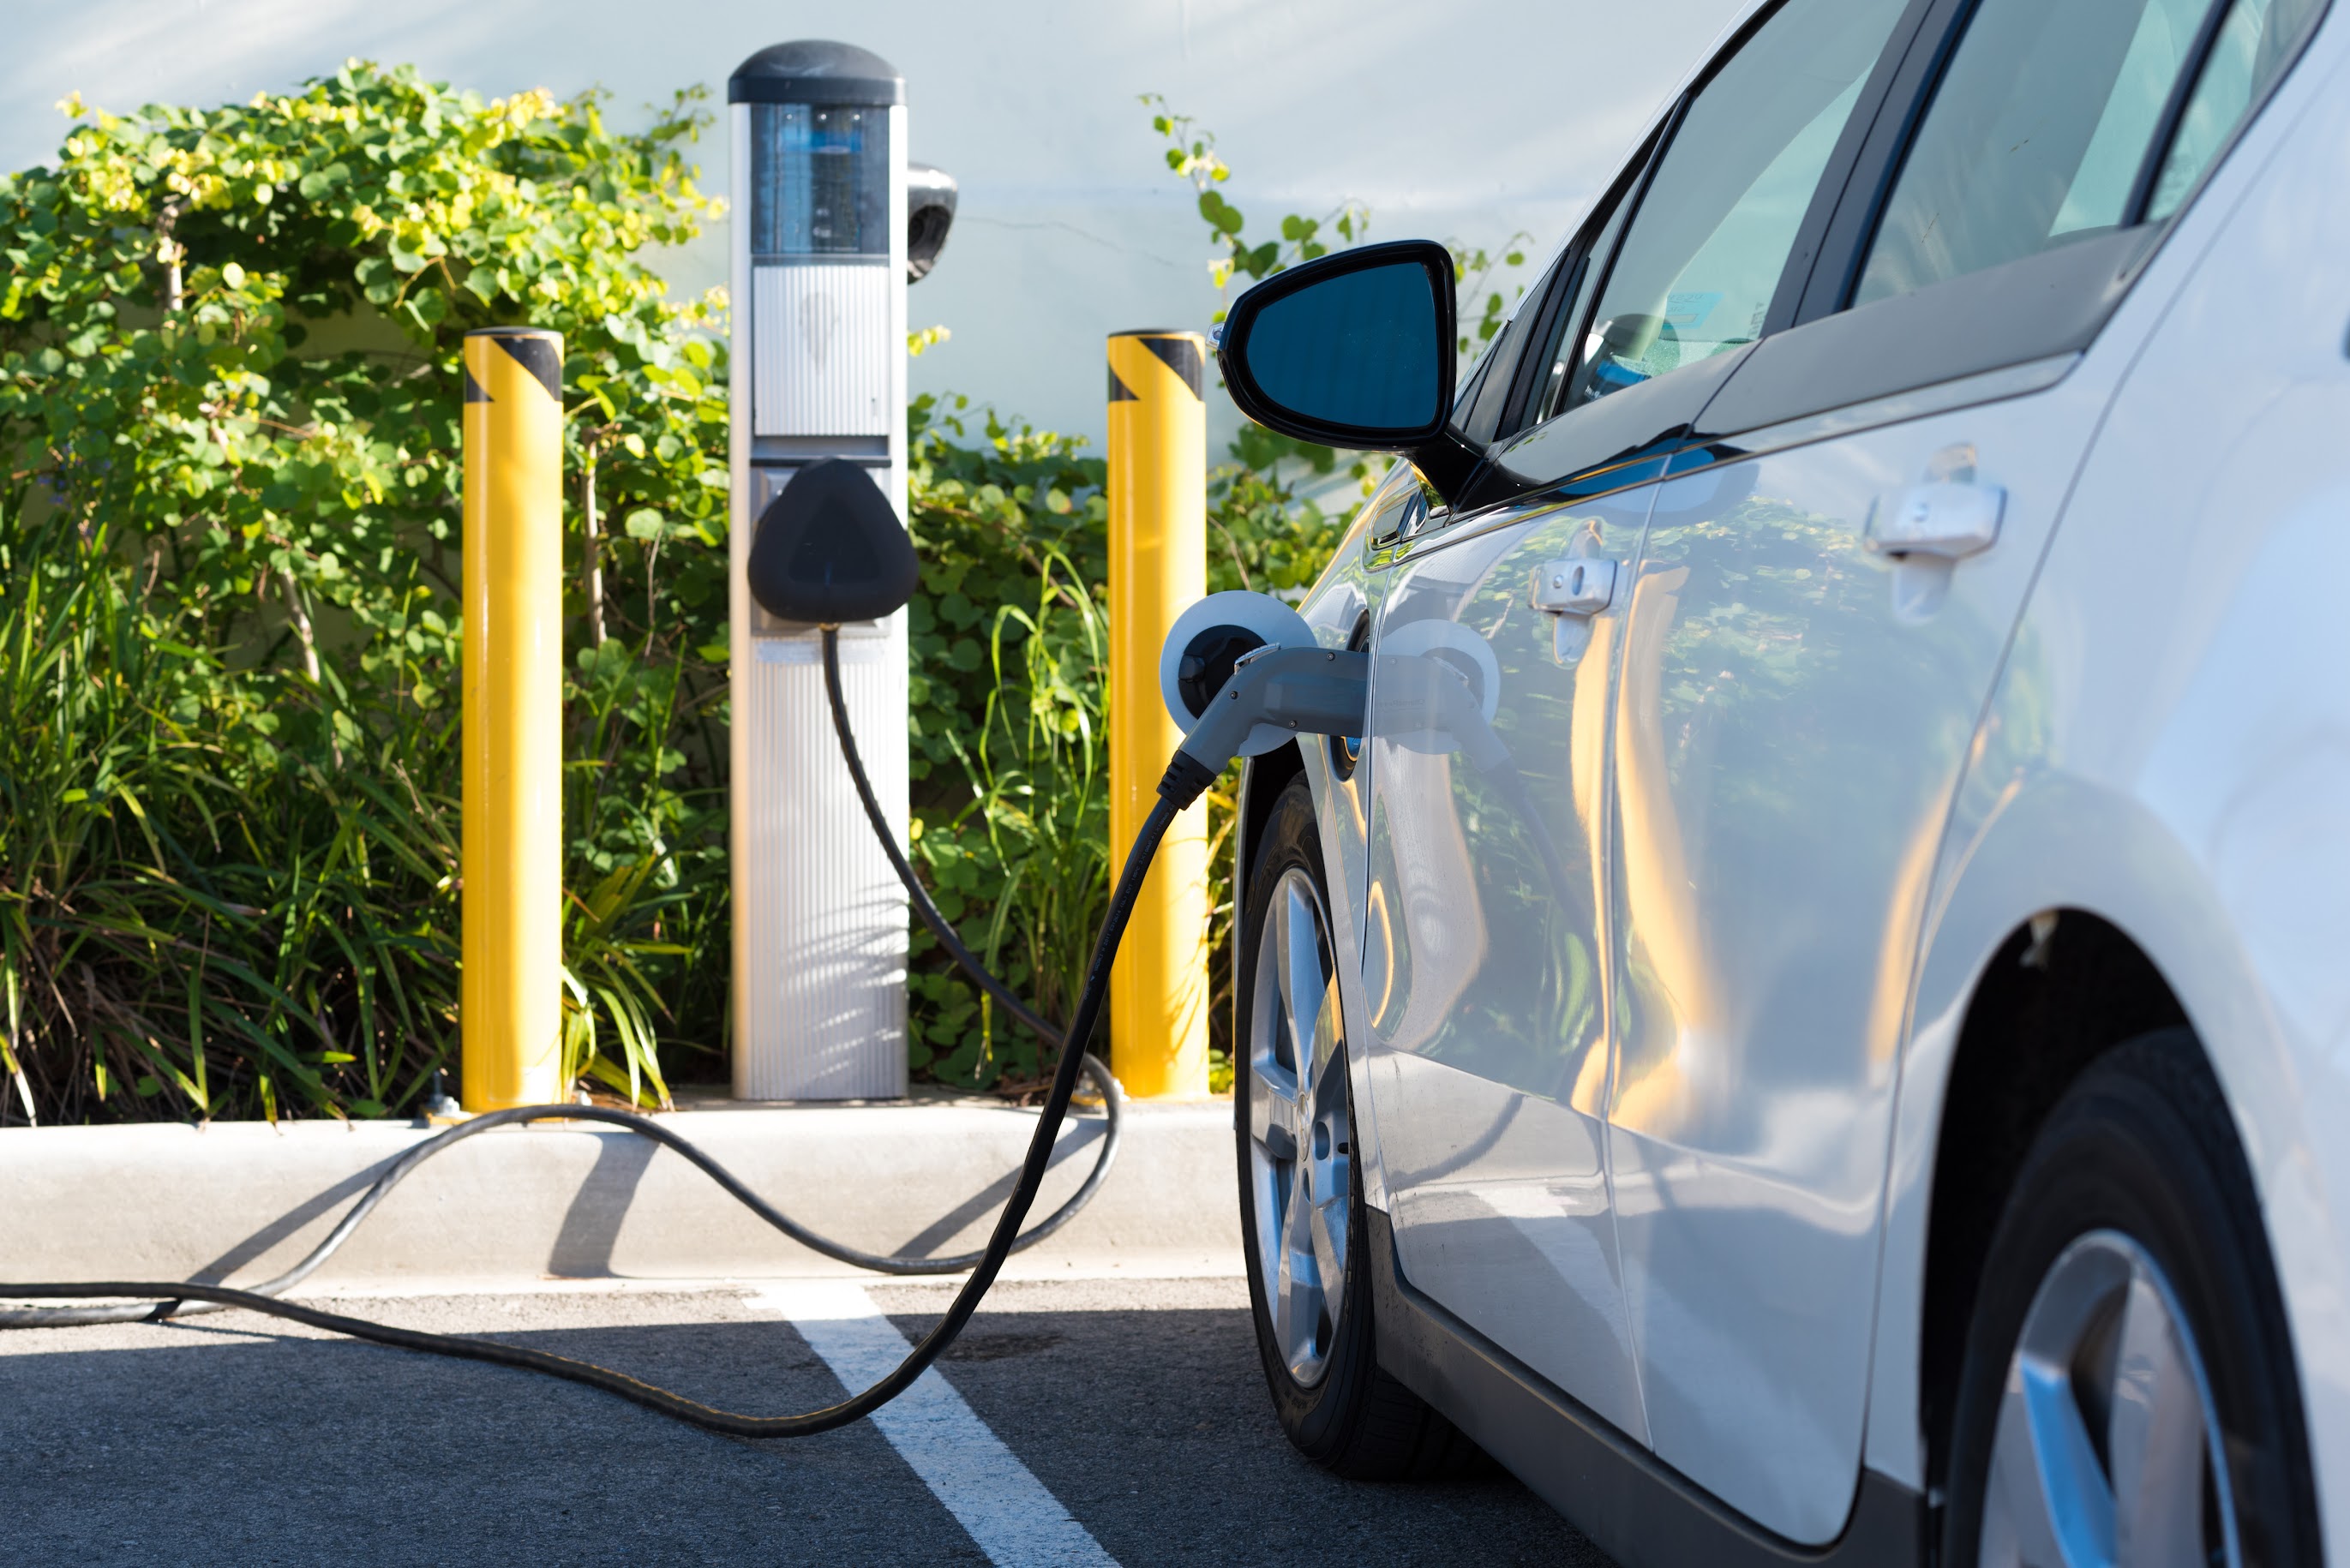  66% of surveyed drivers wouldn’t consider buying an EV. 